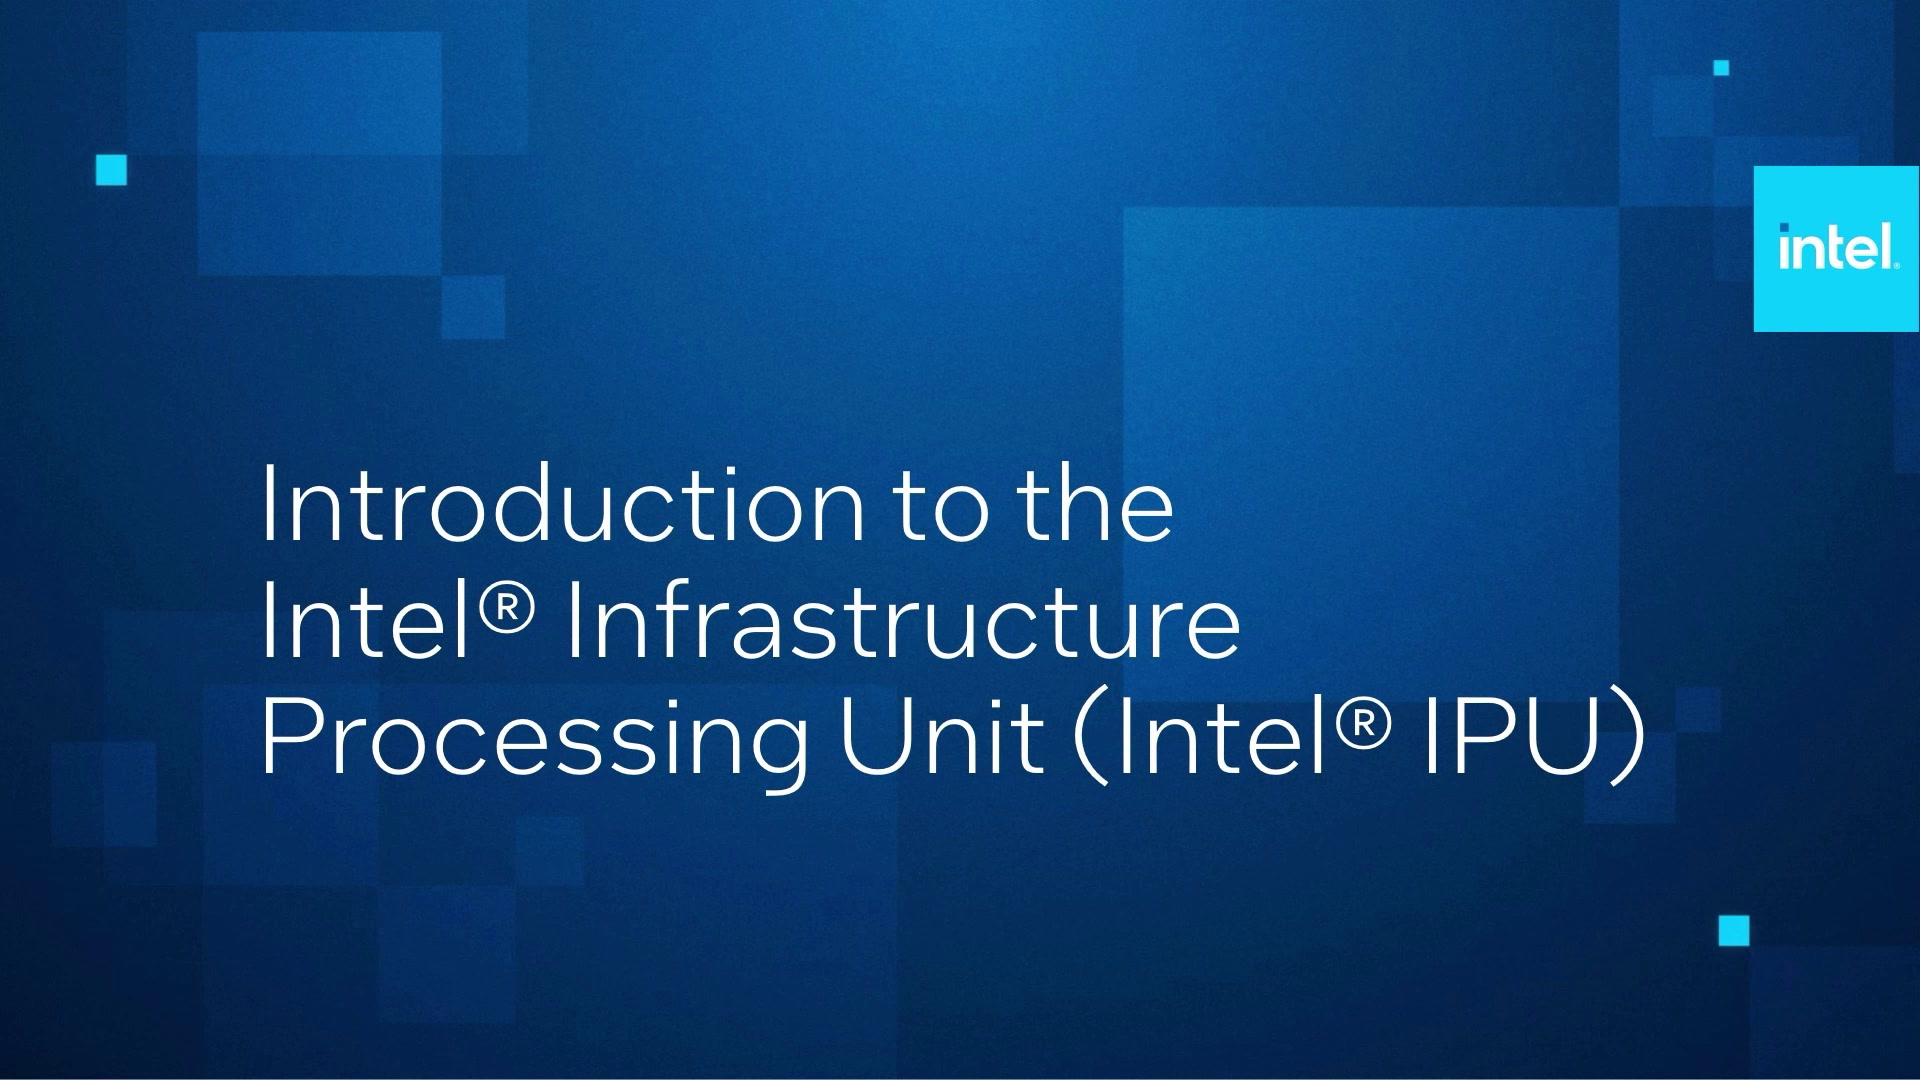 Chapter 1 - Origins of the Intel® Infrastructure Processing Unit (Intel® IPU)